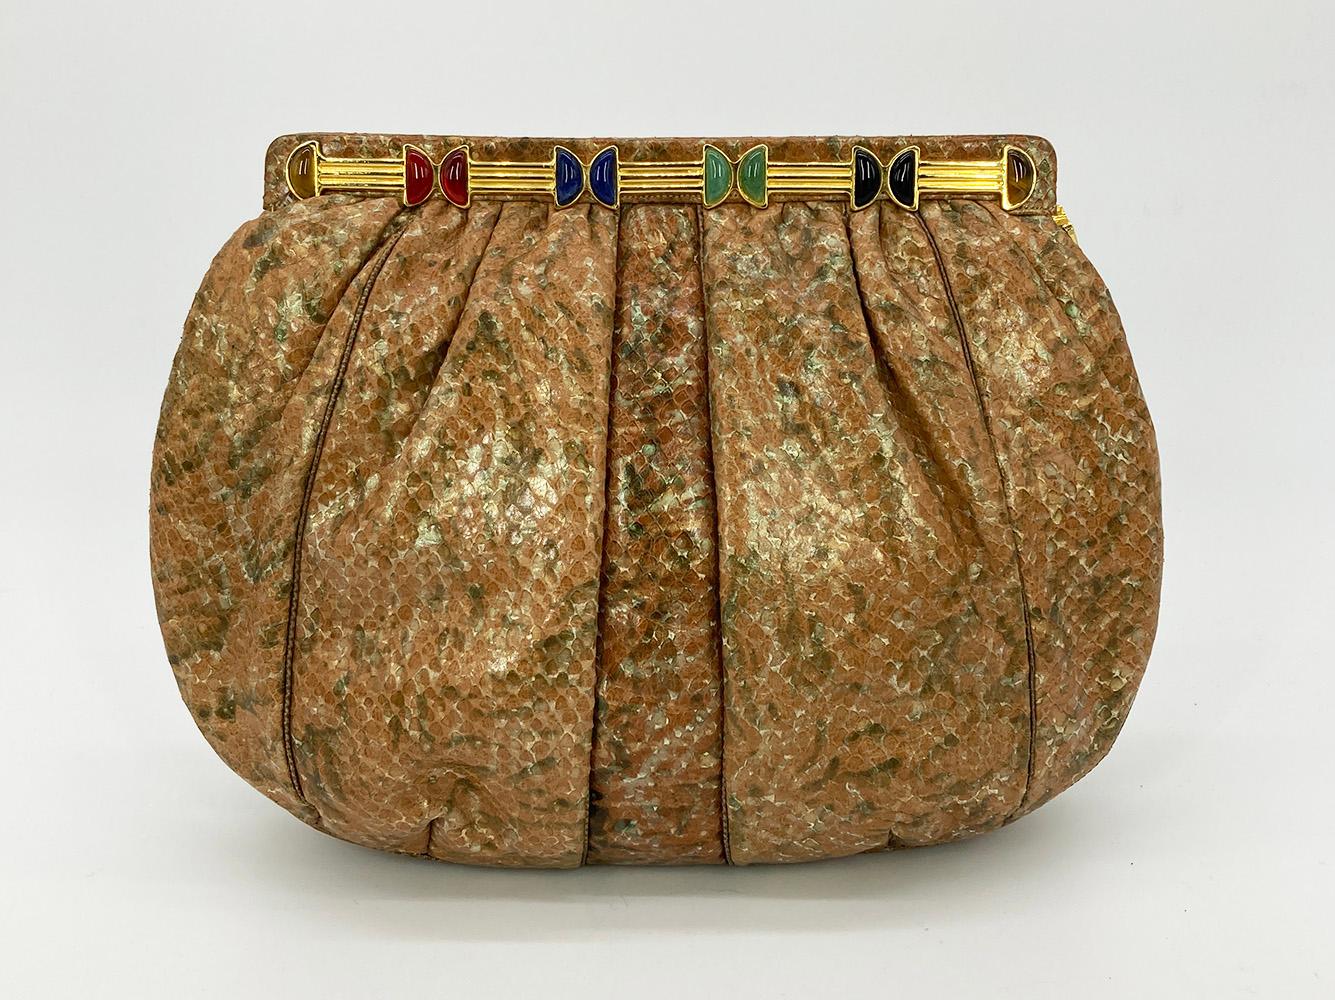 Vintage Judith Leiber Natural Tan and Brown Snakeskin Clutch in excellent condition. Tan and brown python exterior trimmed with gold hardware and multi color gemstones. Side pull latch closure opens to a tan nylon interior with one slit and one zip